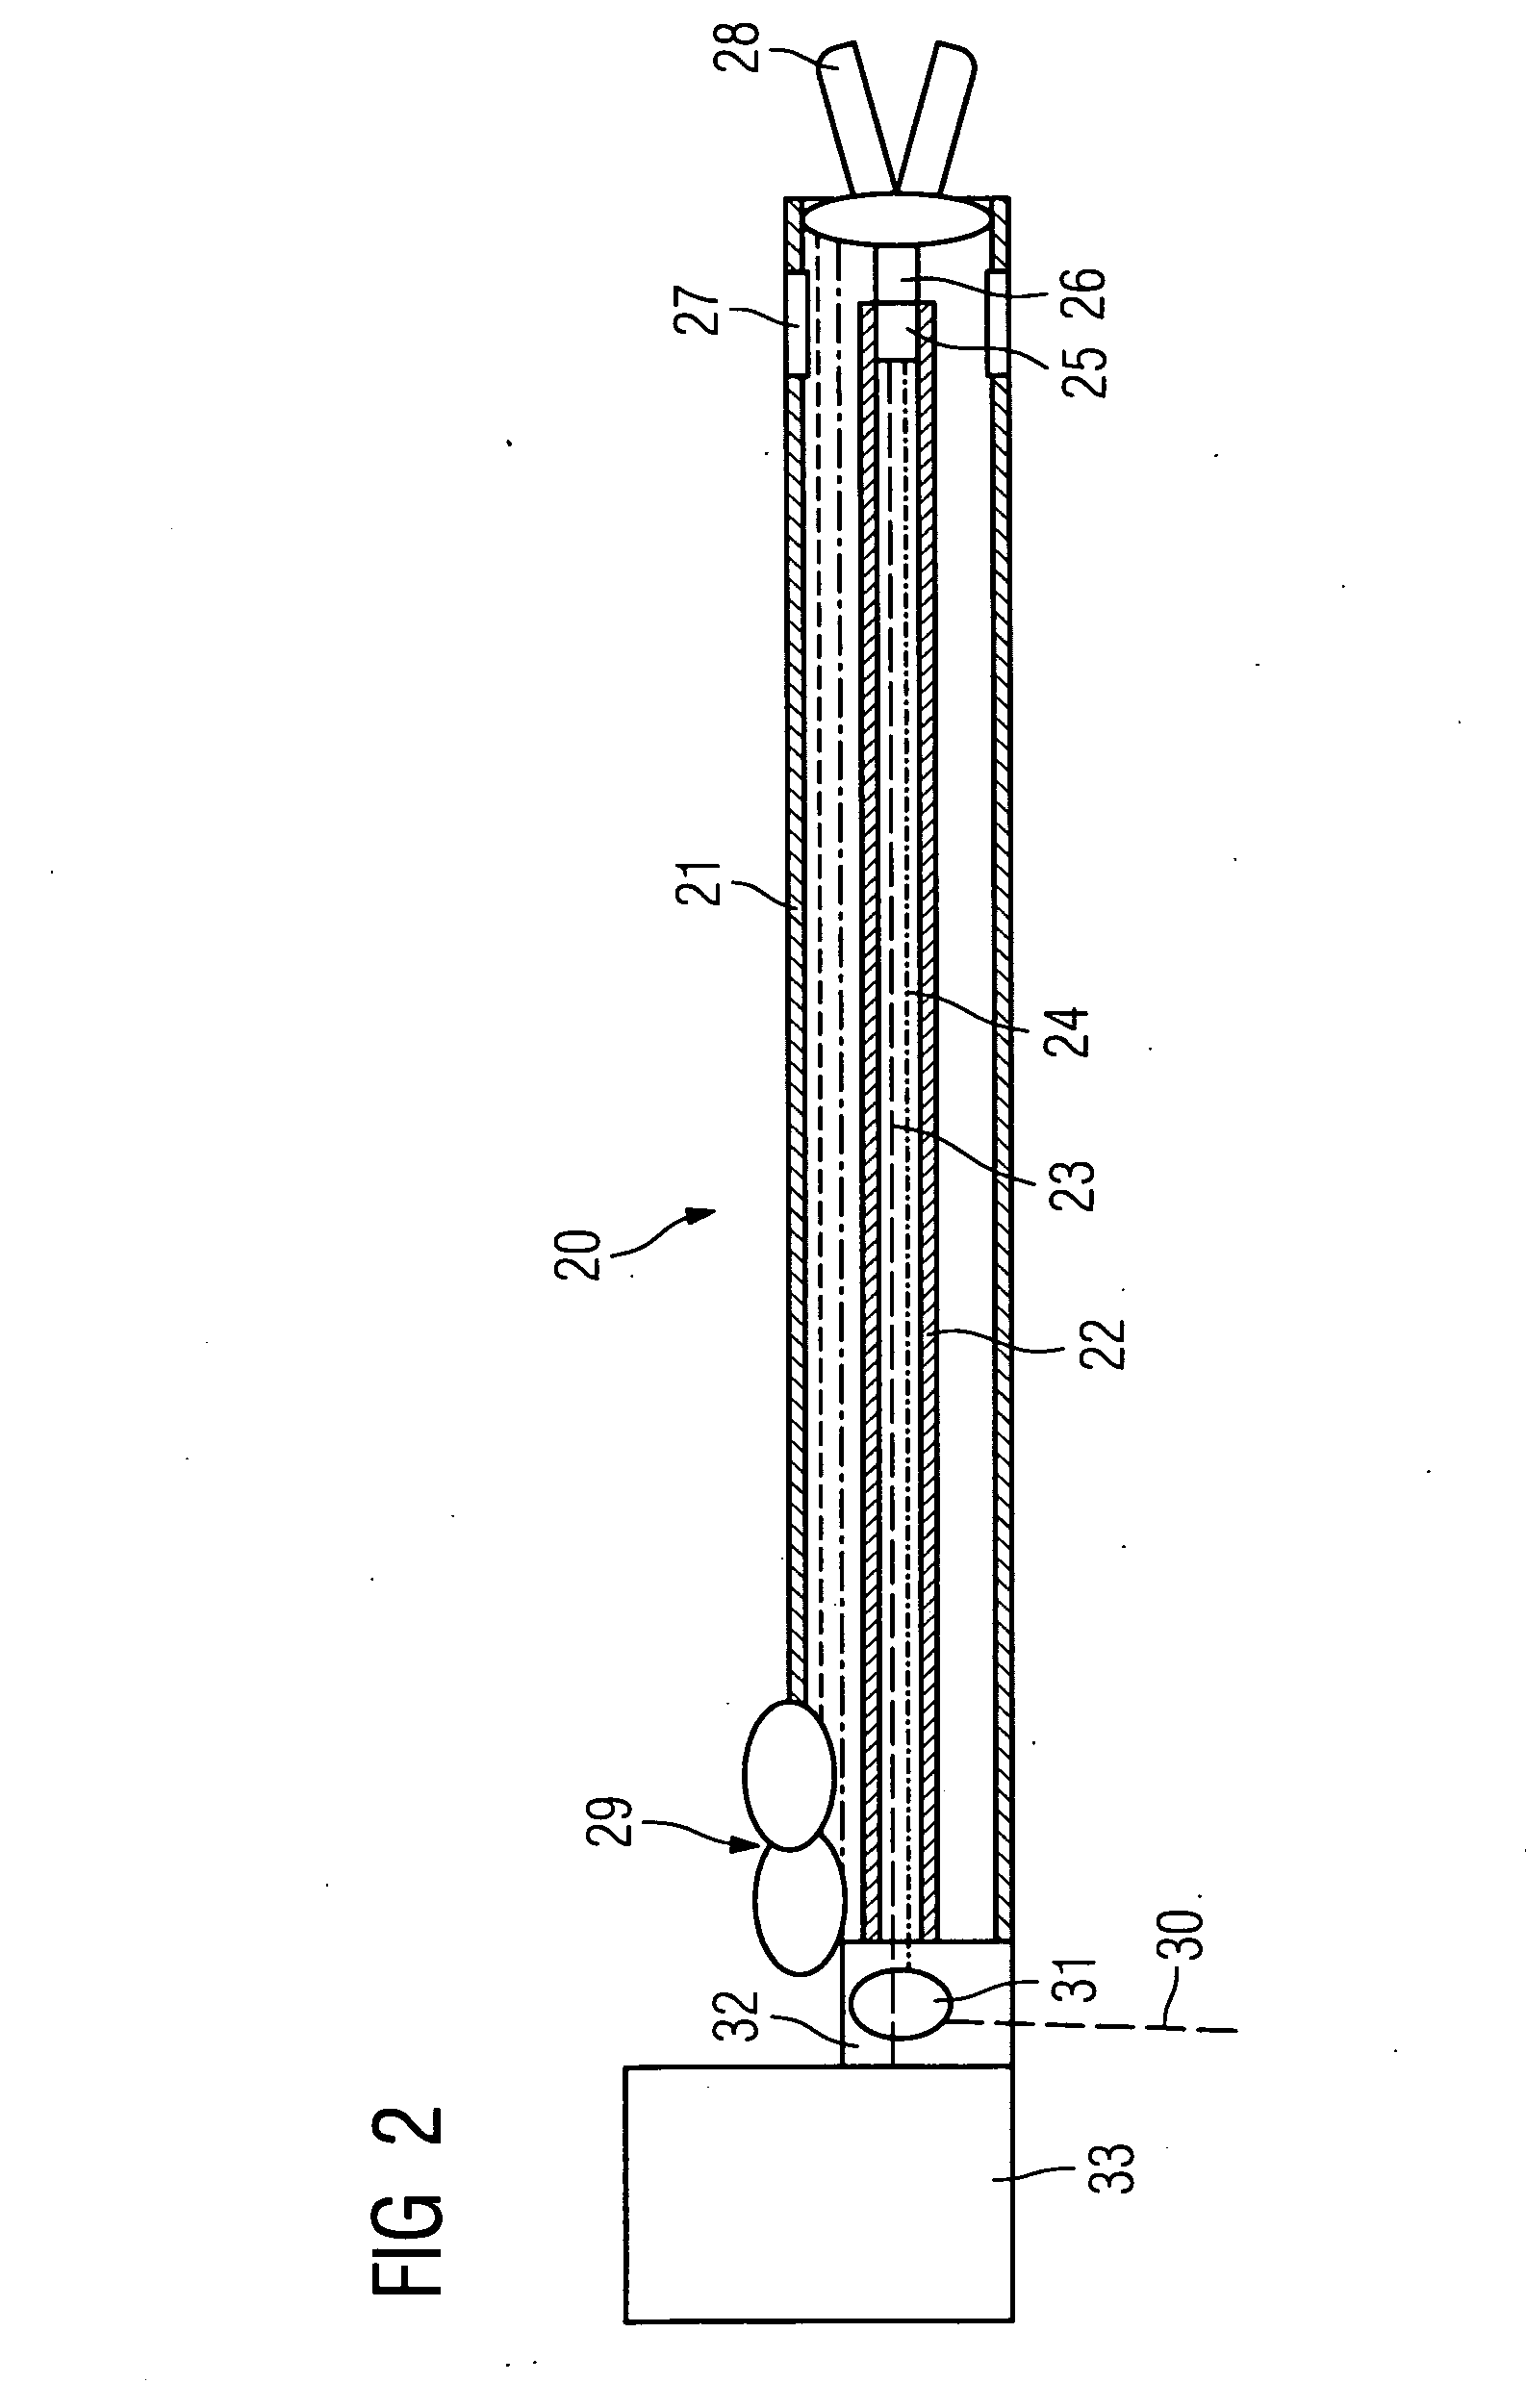 Catheter device with a position sensor system for treating a vessel blockage using image monitoring